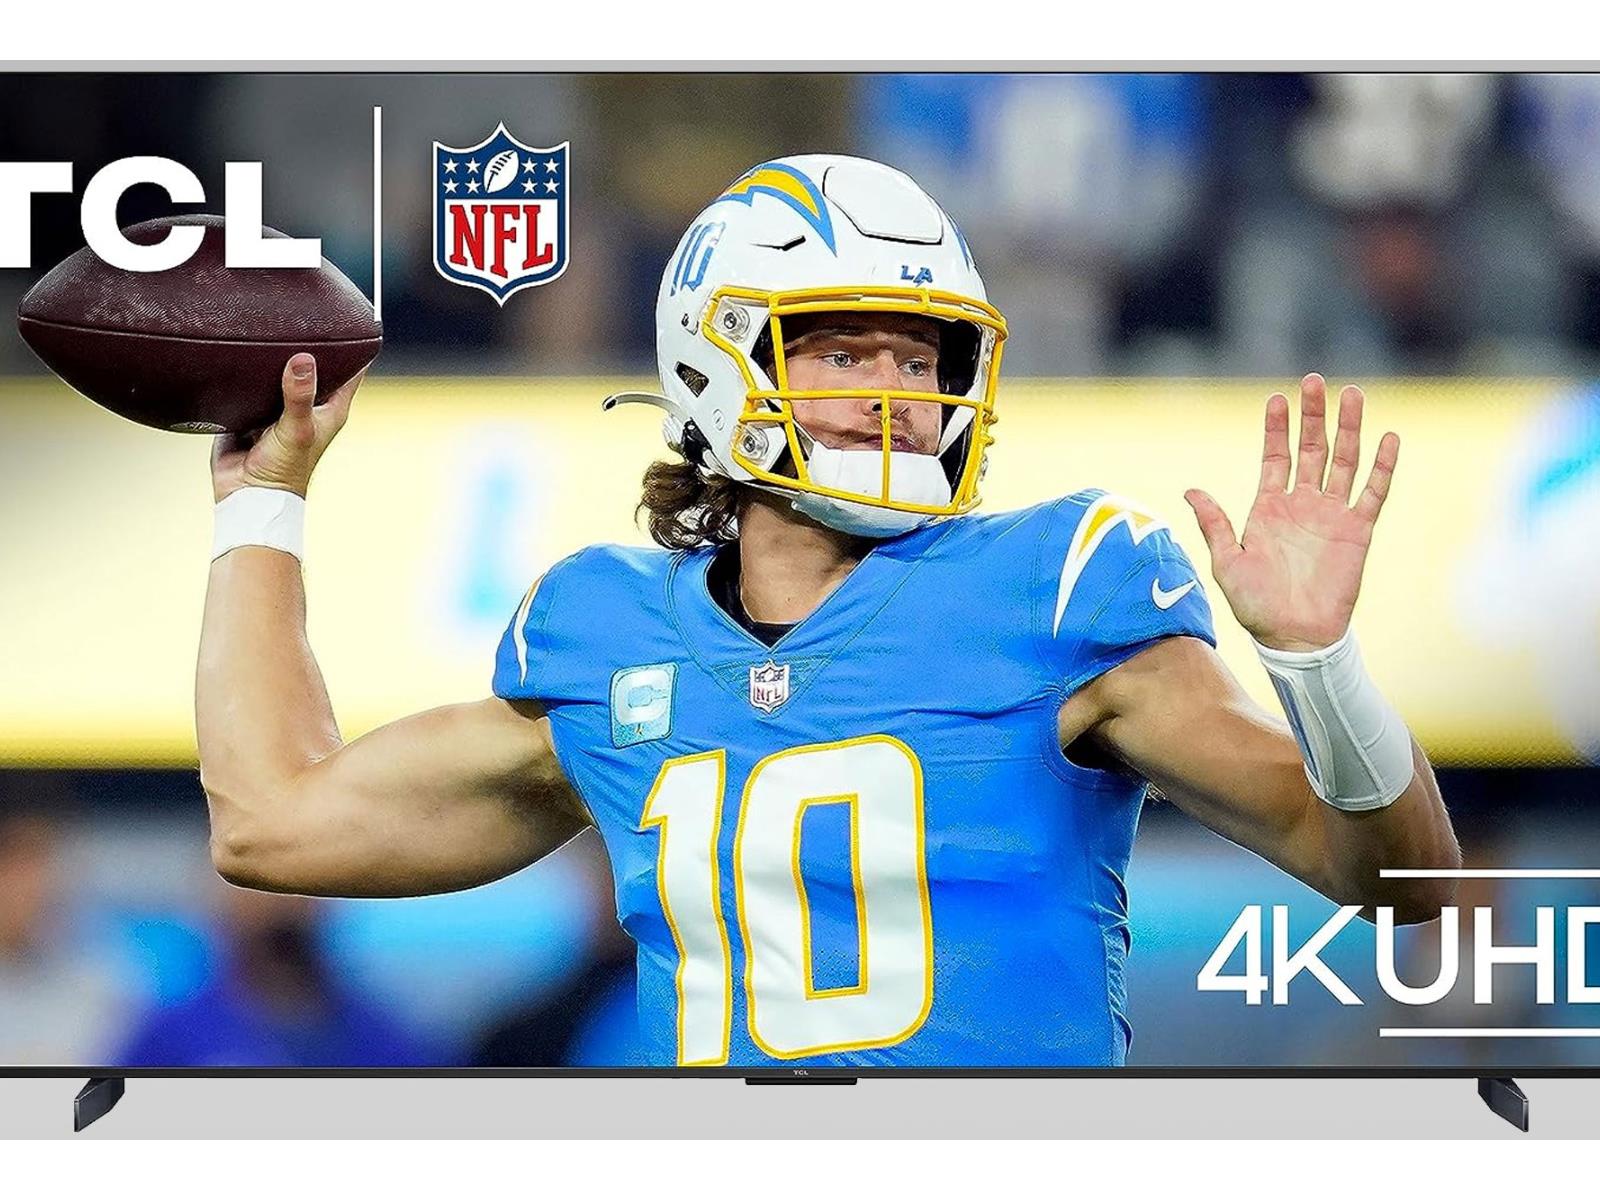 Gear Up For NFL Football Season With These 4K TV Deals From Samsung, LG And Others HotHardware